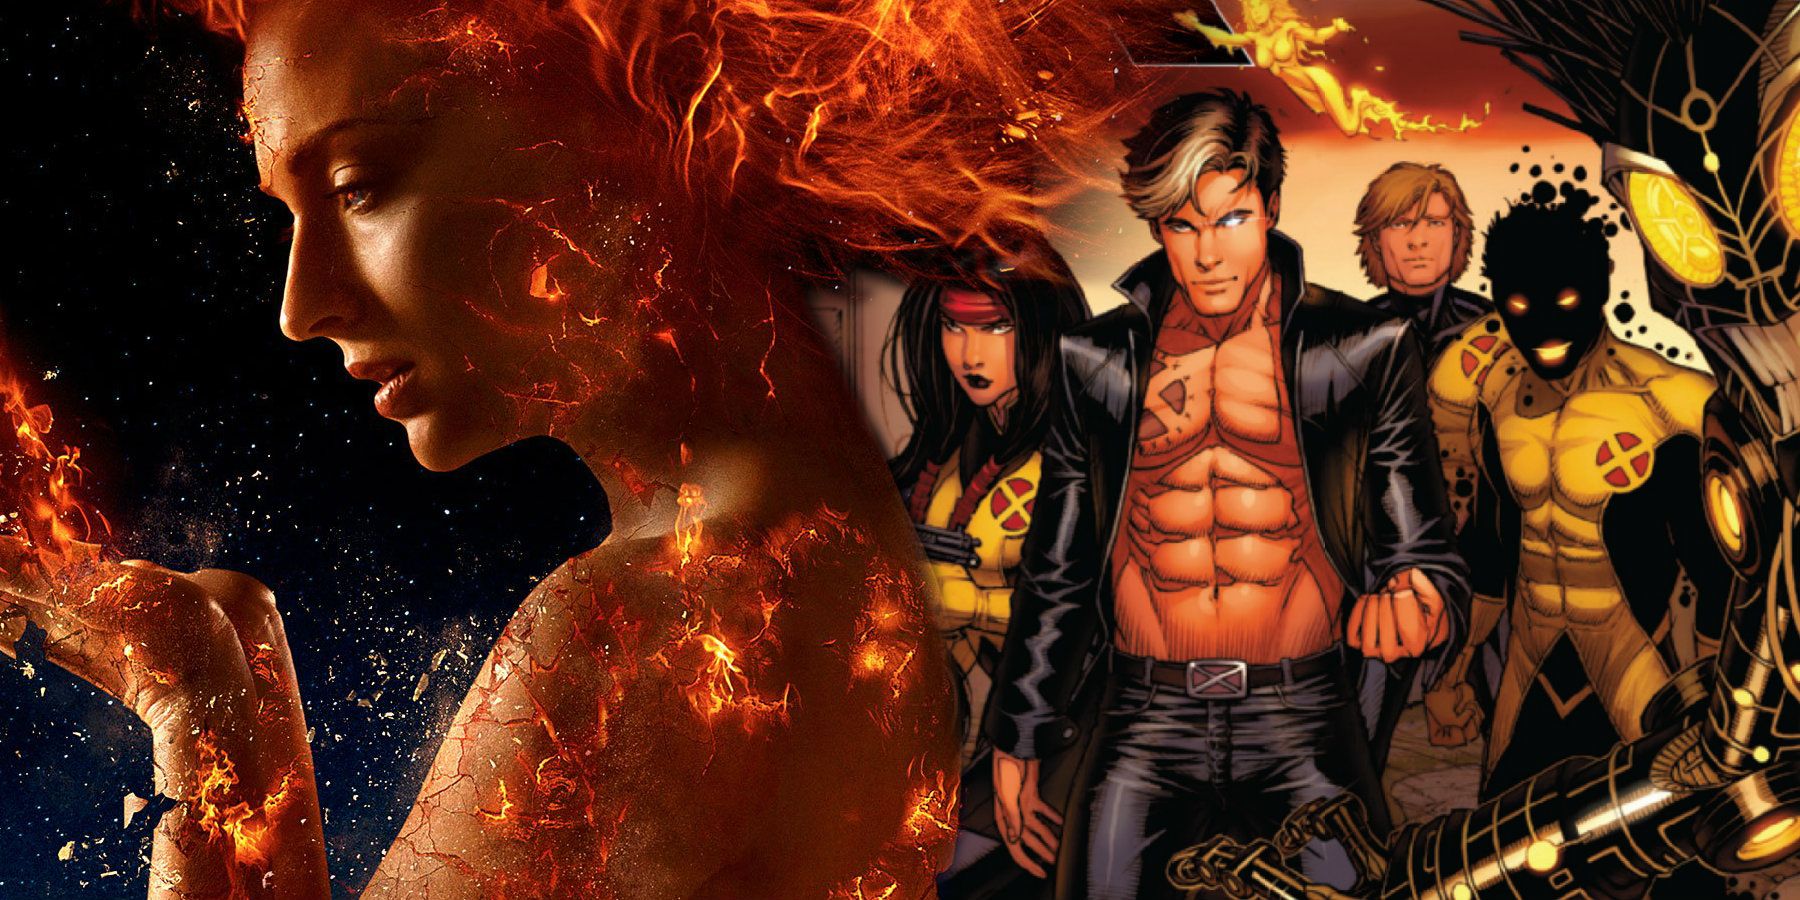 X-Men Movie 'New Mutants' in Theaters After Delays: Box Office